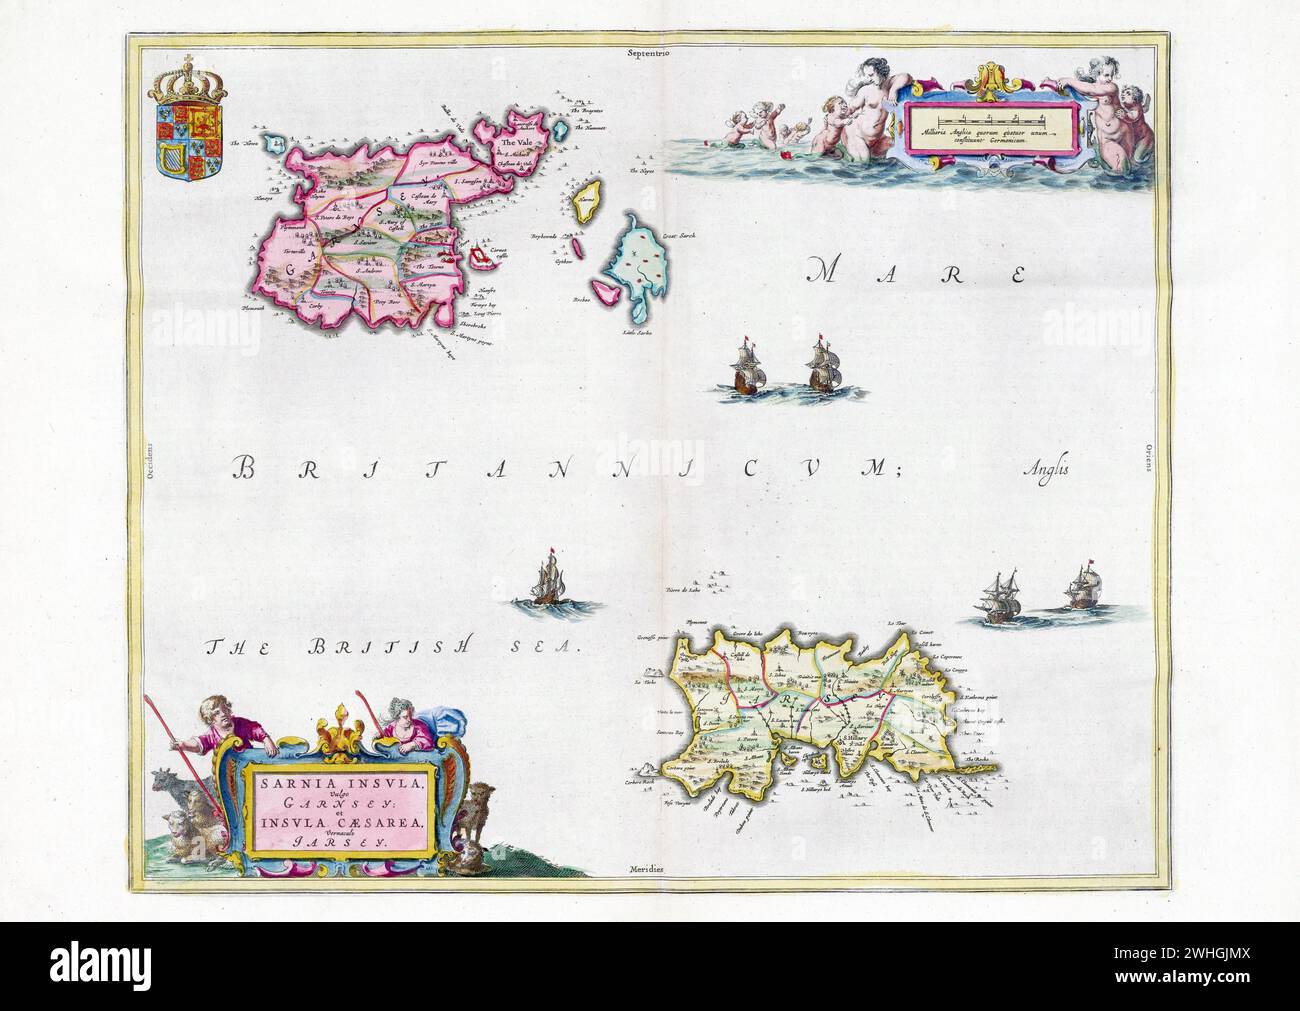 Historical map of Guernsey and Jersey, Channel Islands, English Channel, Willem and Johannes Joan Blaeu, ca 1665 *** Historical map of Guernsey and Jersey, Channel Islands, English Channel, Willem and Johannes Joan Blaeu, ca 1665 Stock Photo